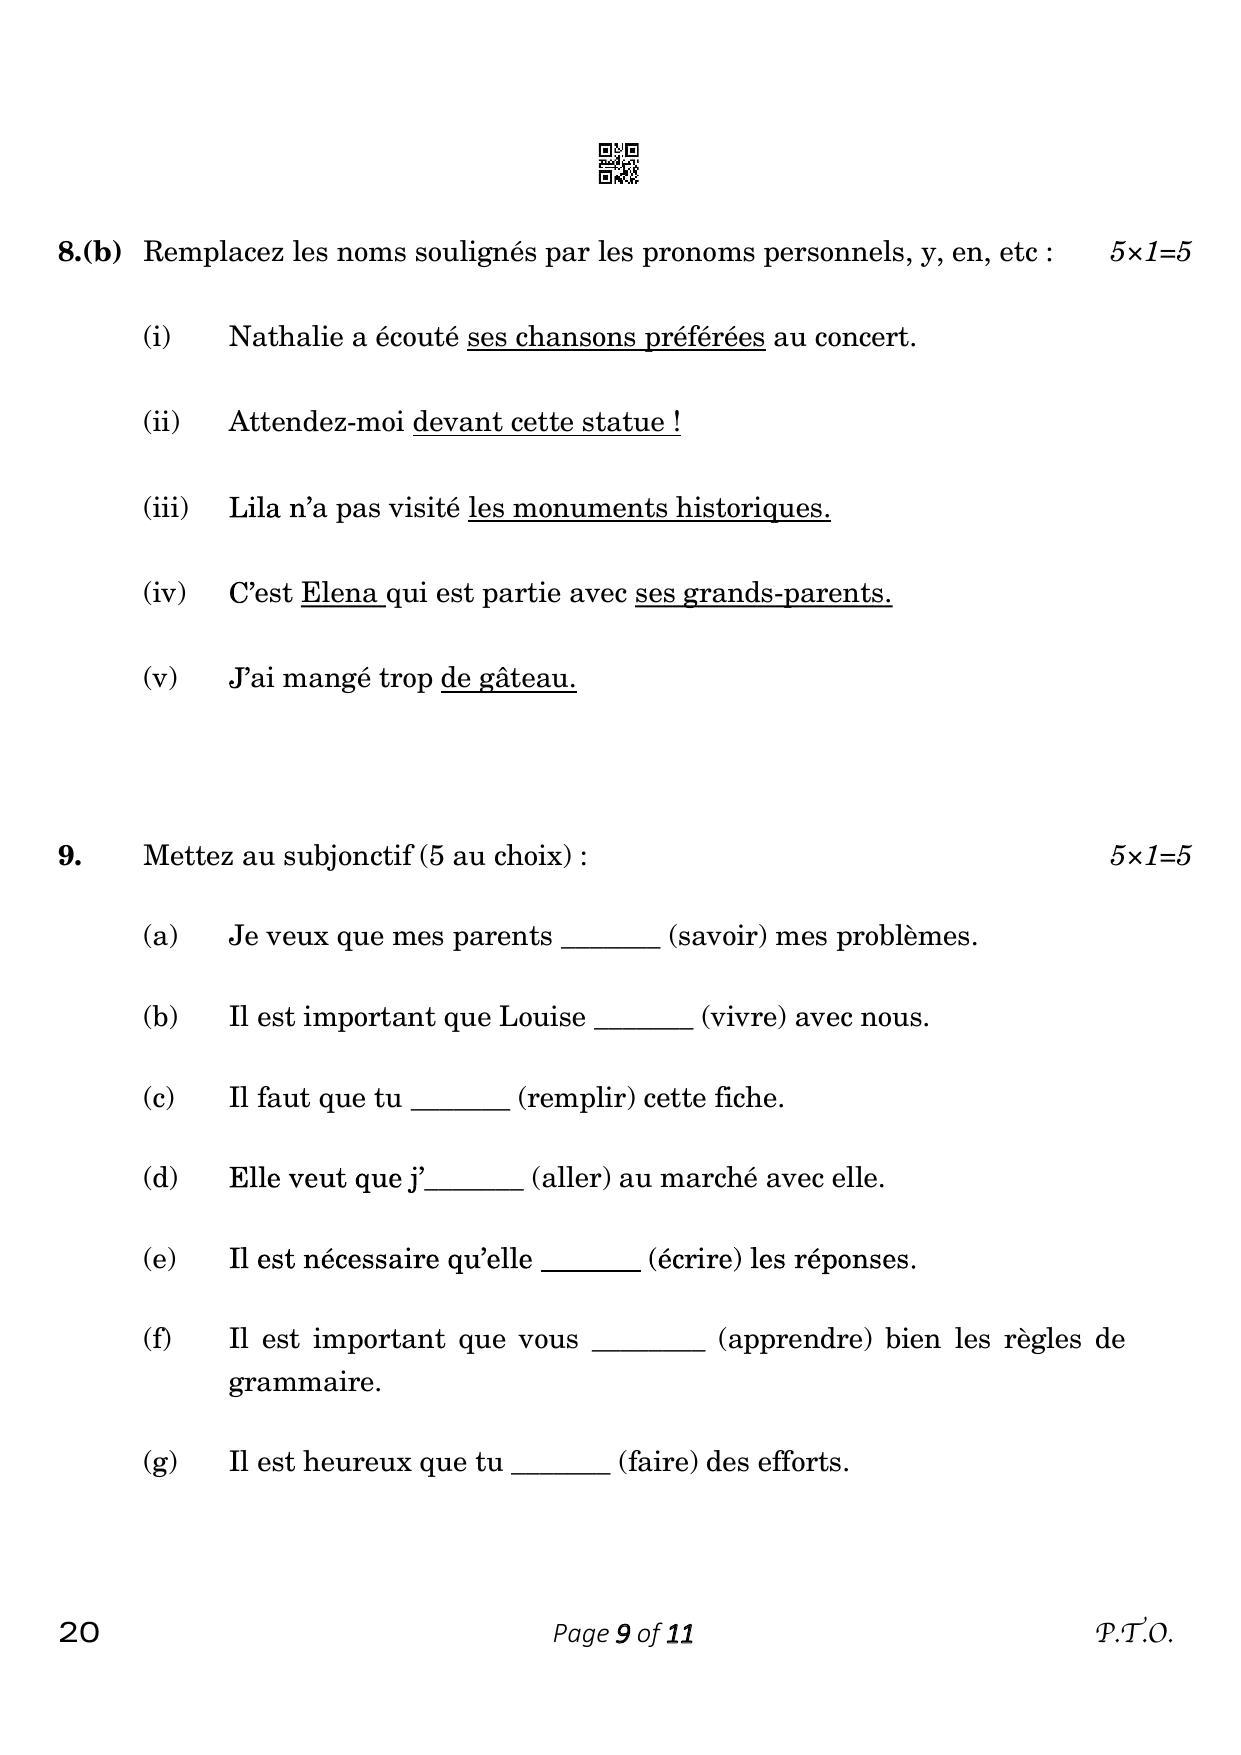 CBSE Class 10 French (Compartment) 2023 Question Paper - Page 9